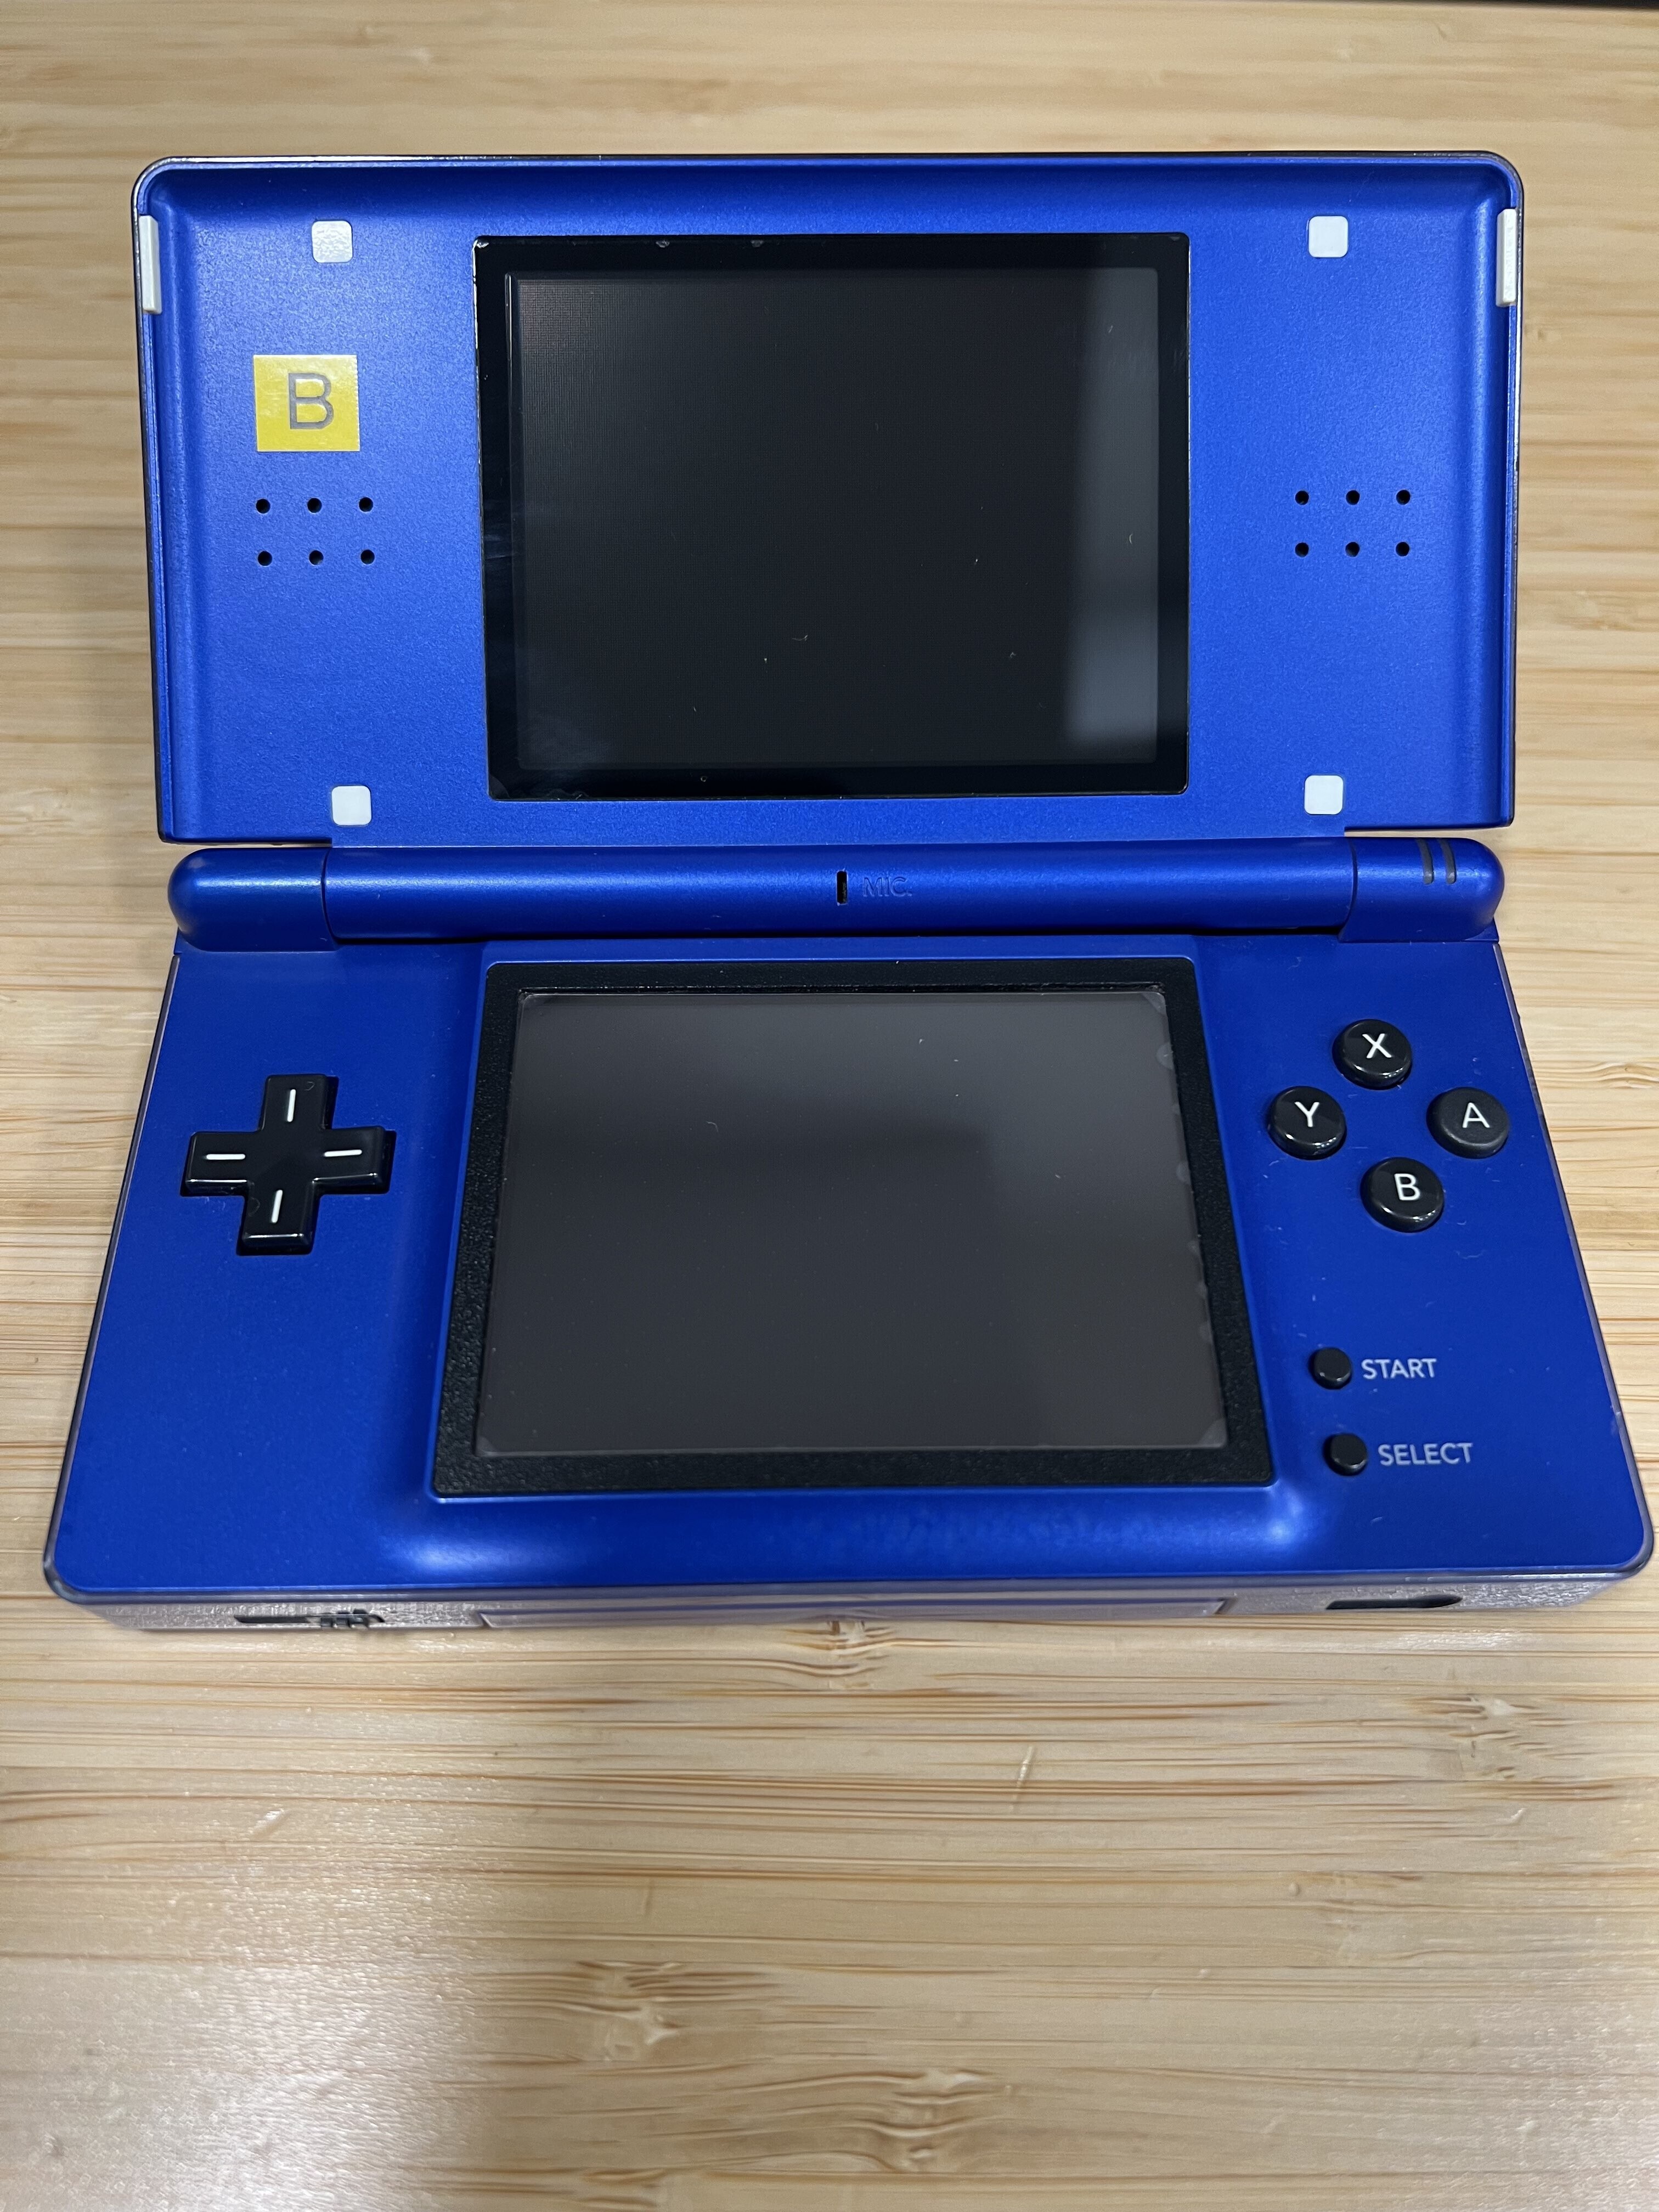 Nintendo DS (Fat) Prototype Console - Consolevariations